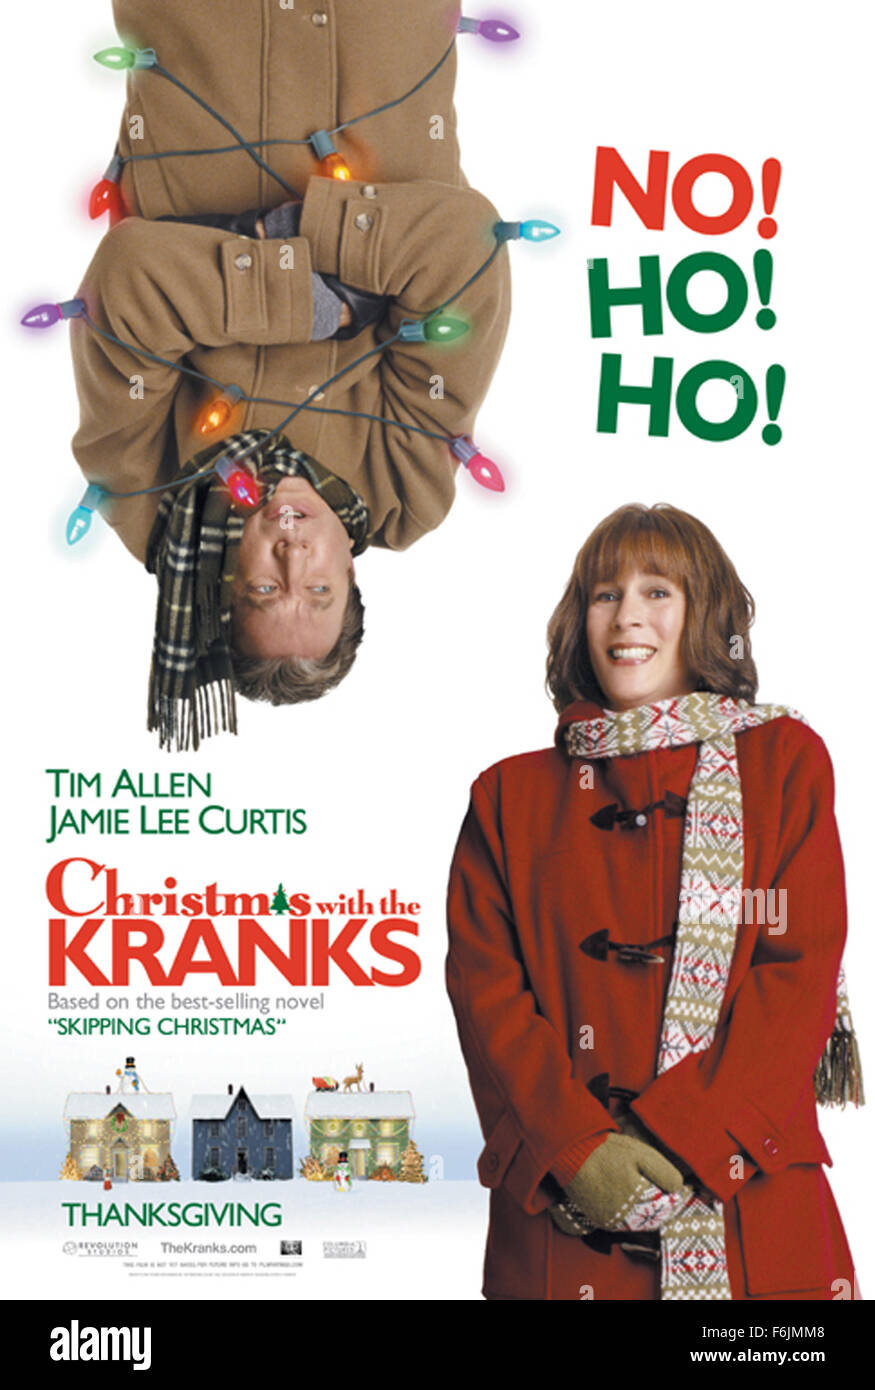 RELEASE DATE: November 24, 2004. MOVIE TITLE: Christmas with the Kranks. STUDIO: Revolution Studios. PLOT: Luther Krank is fed up with the commerciality of Christmas; he decides to skip the holiday and go on a vacation with his wife instead. But when his daughter decides at the last minute to come home, he must put together a holiday celebration. PICTURED: TIM ALLEN as Luther Krank and JAMIE LEE CURTIS as his wife Nora. Stock Photo